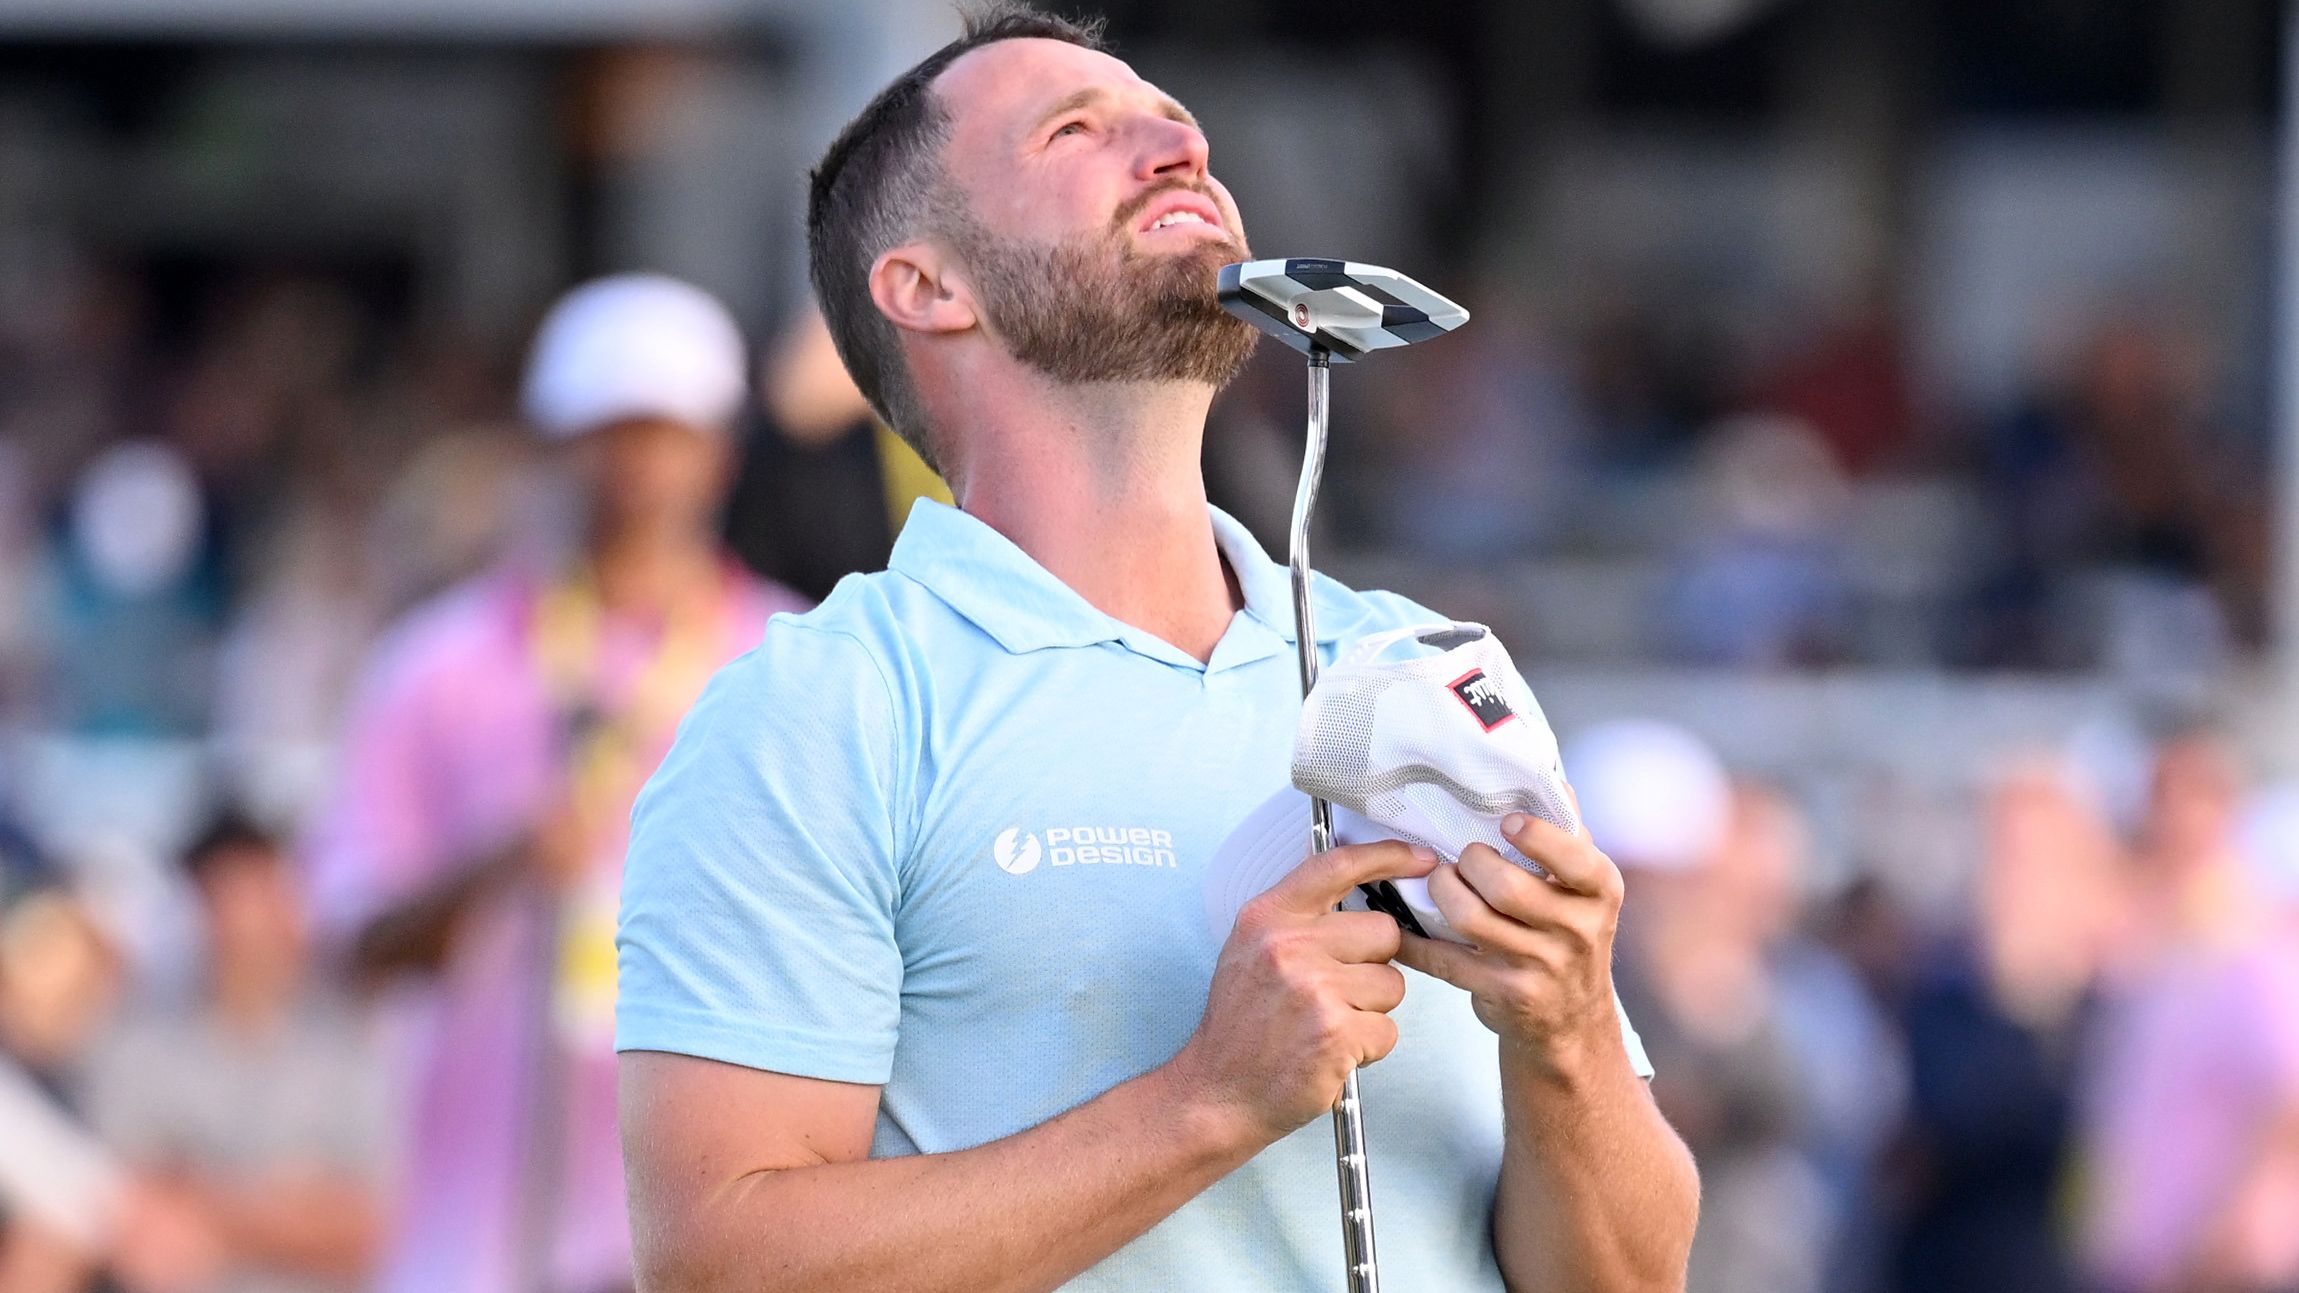 Wyndham Clark of the United States reacts to his winning putt at the US Open.